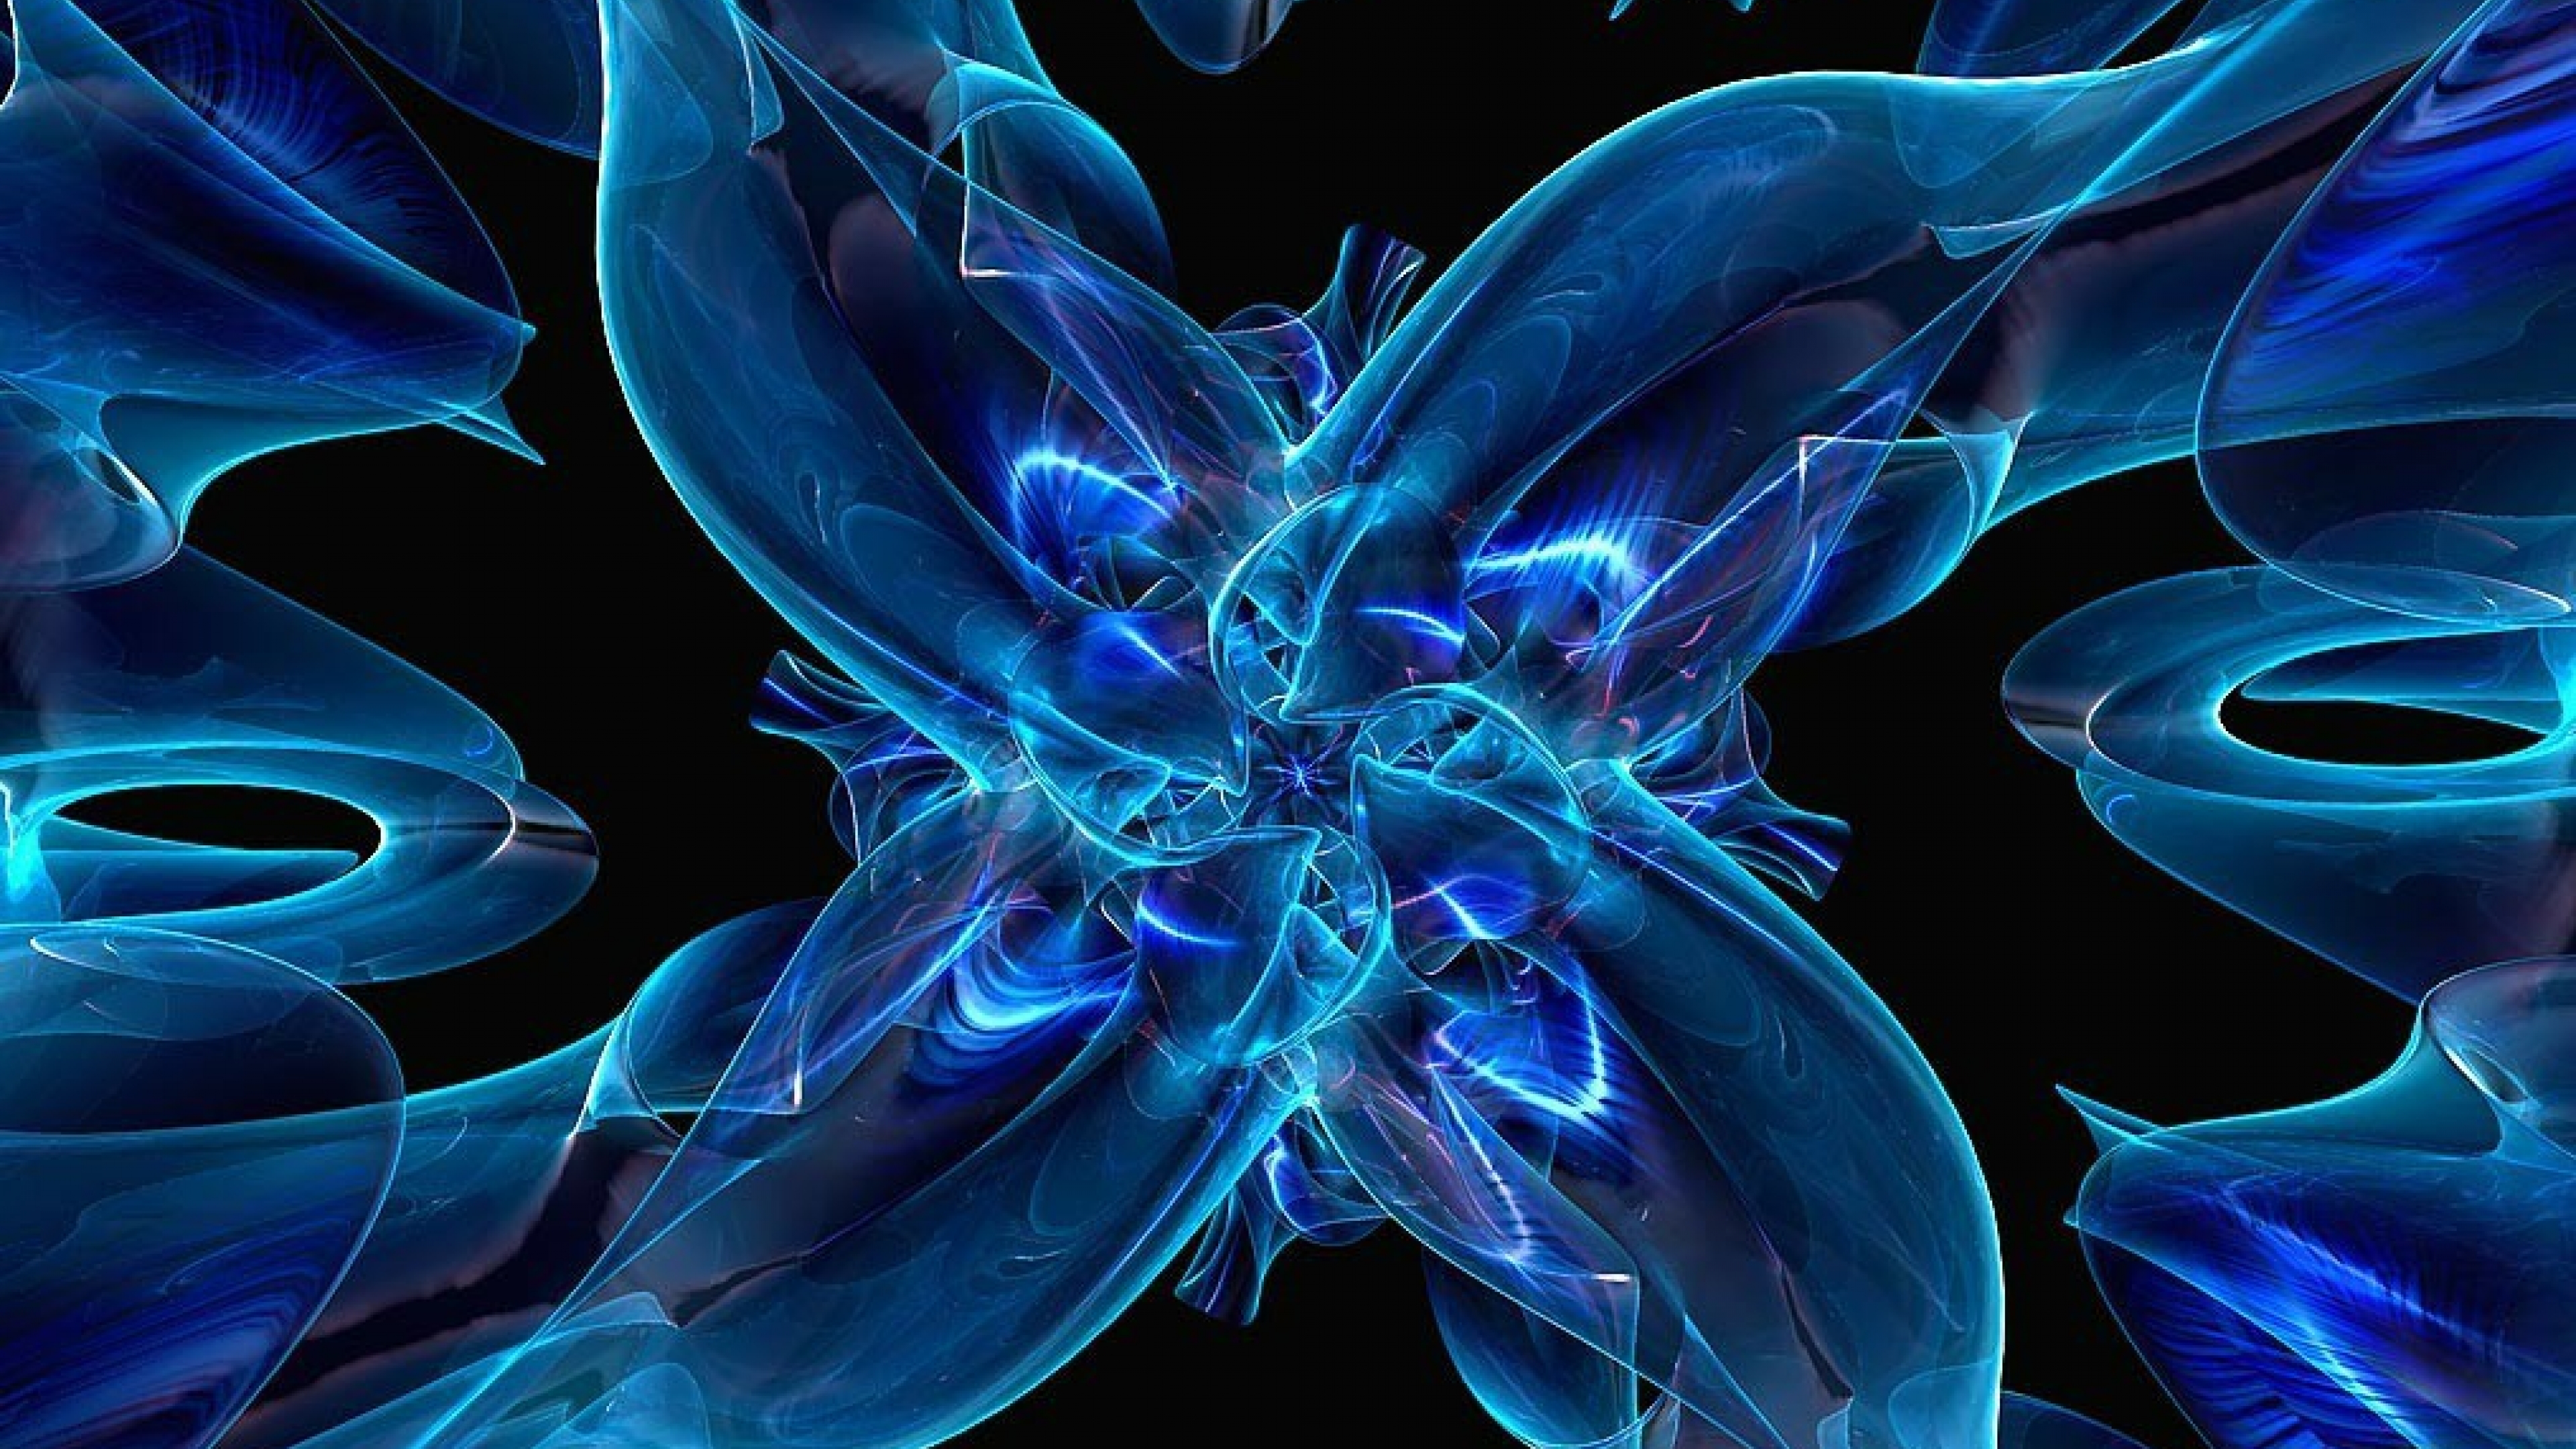 4100+ Fractal HD Wallpapers and Backgrounds